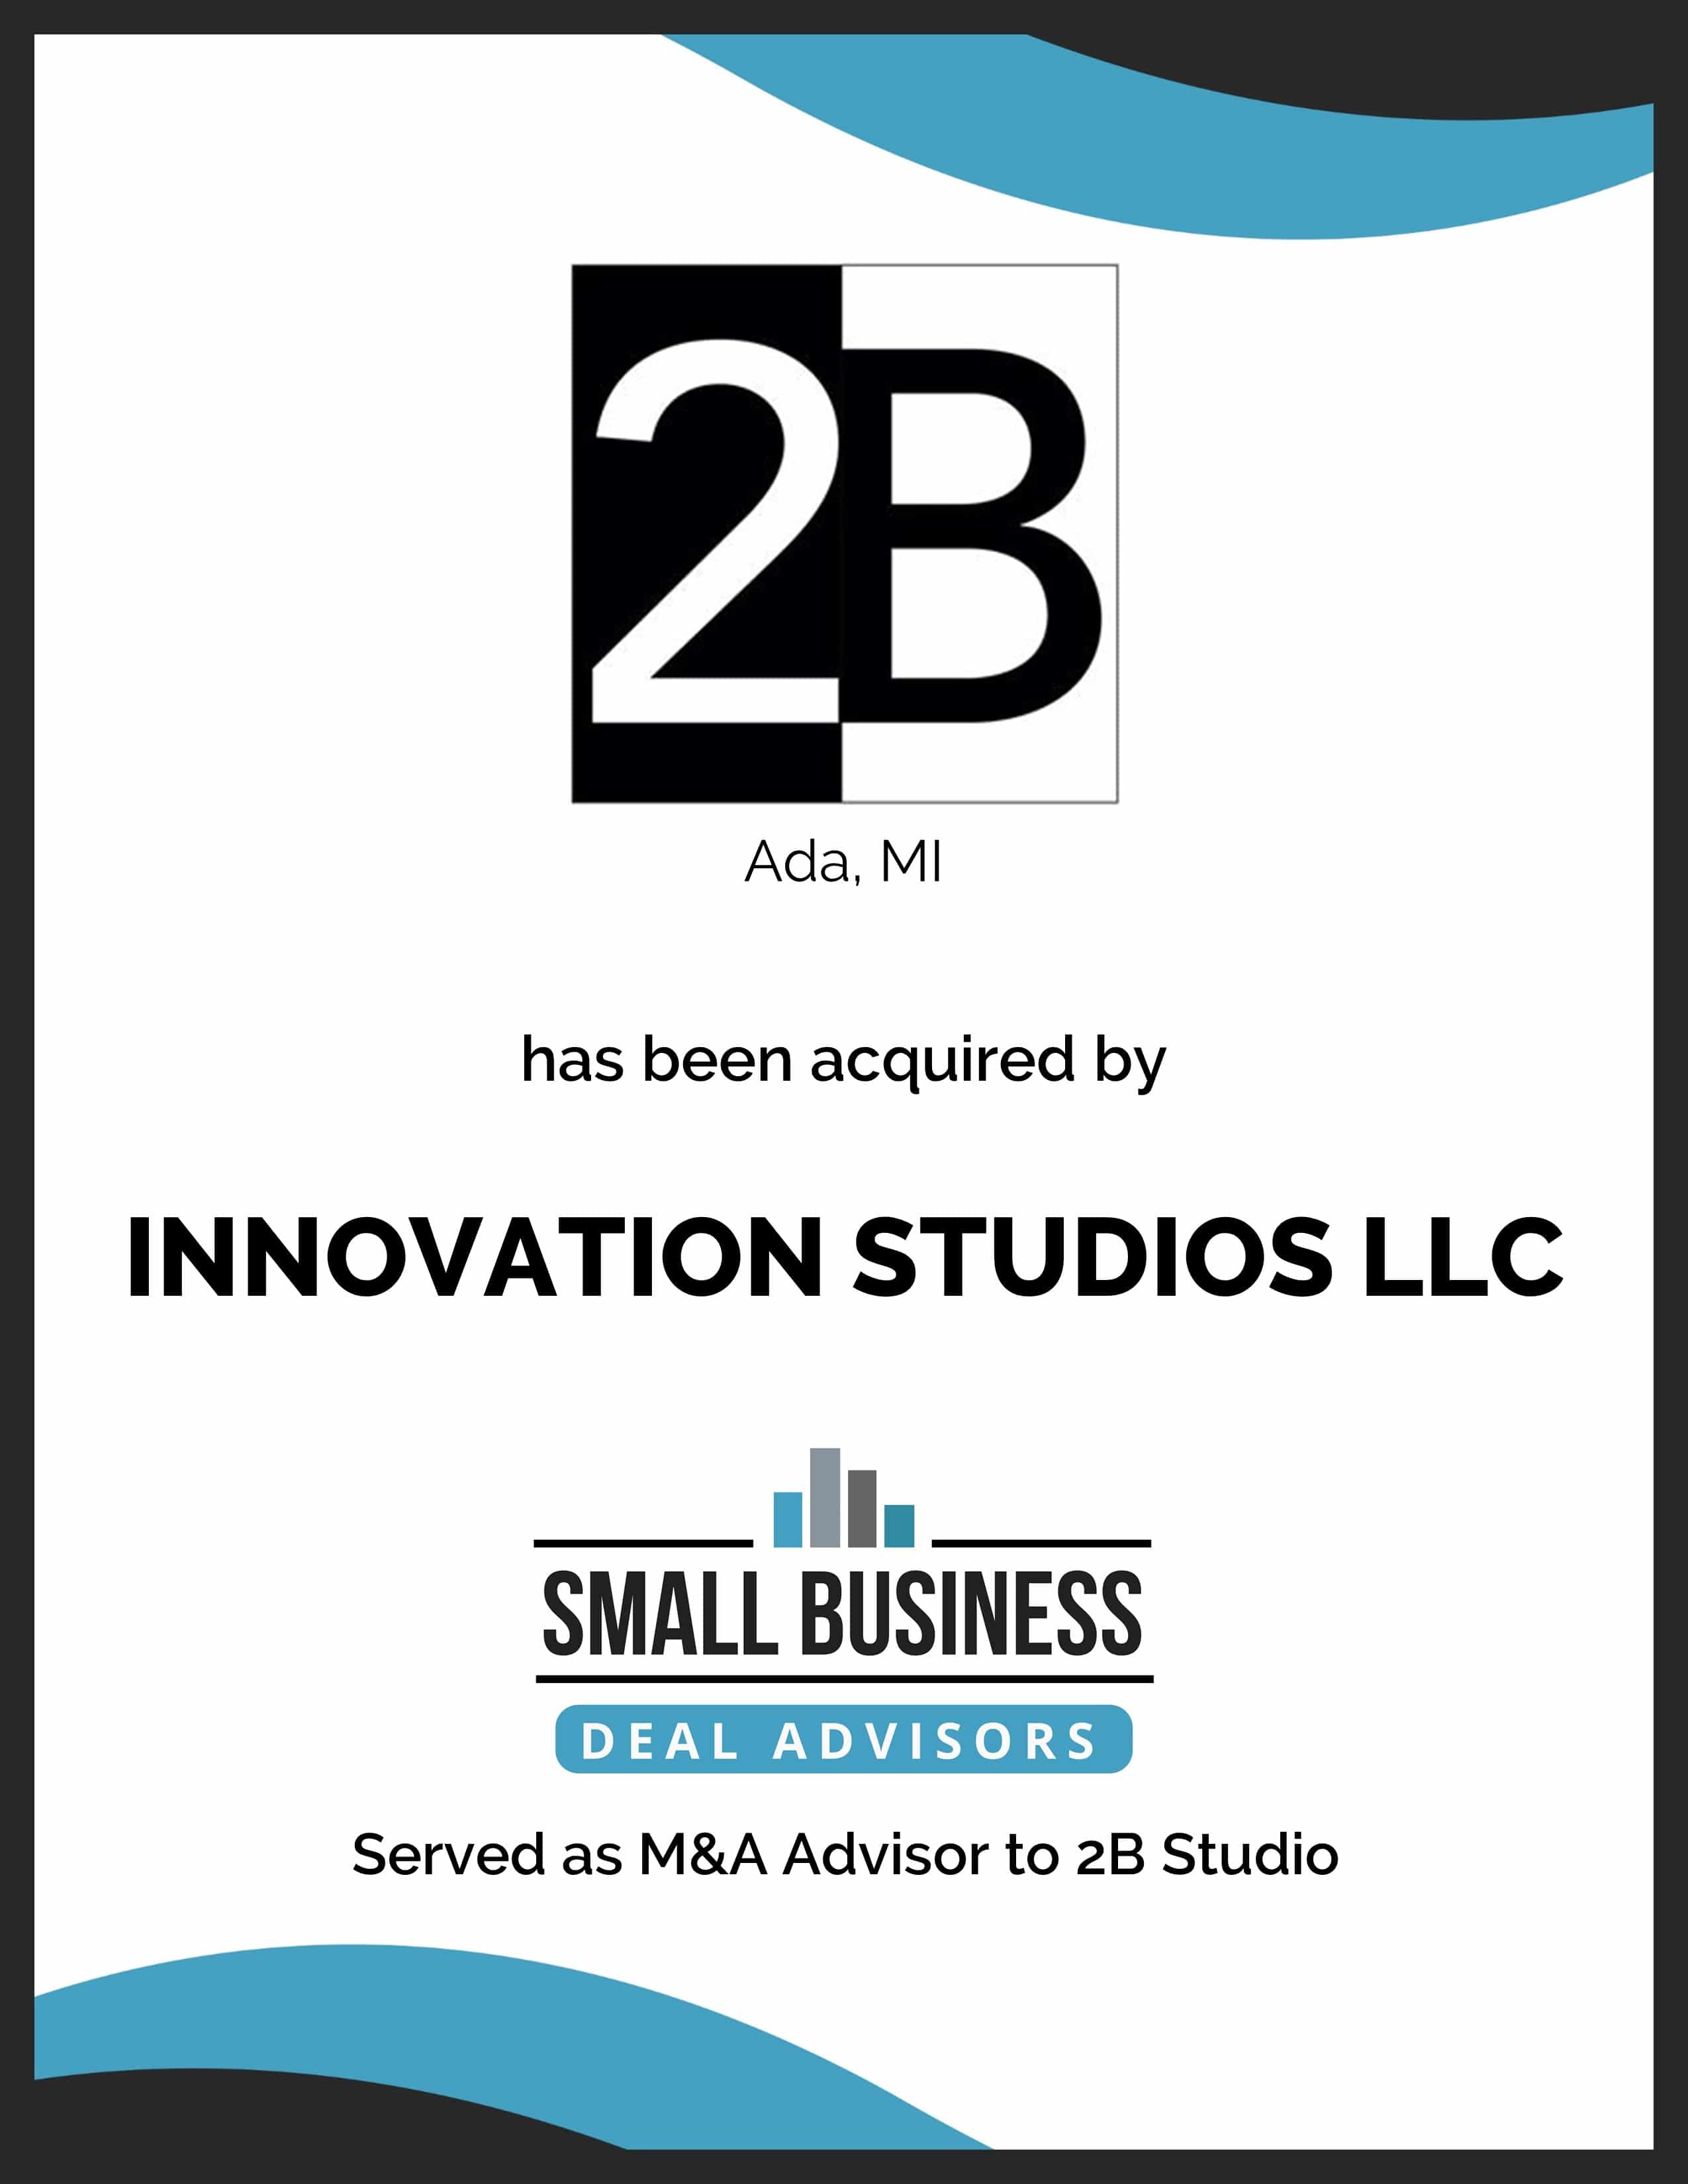 2B Studio Acquired by Innovation Studios